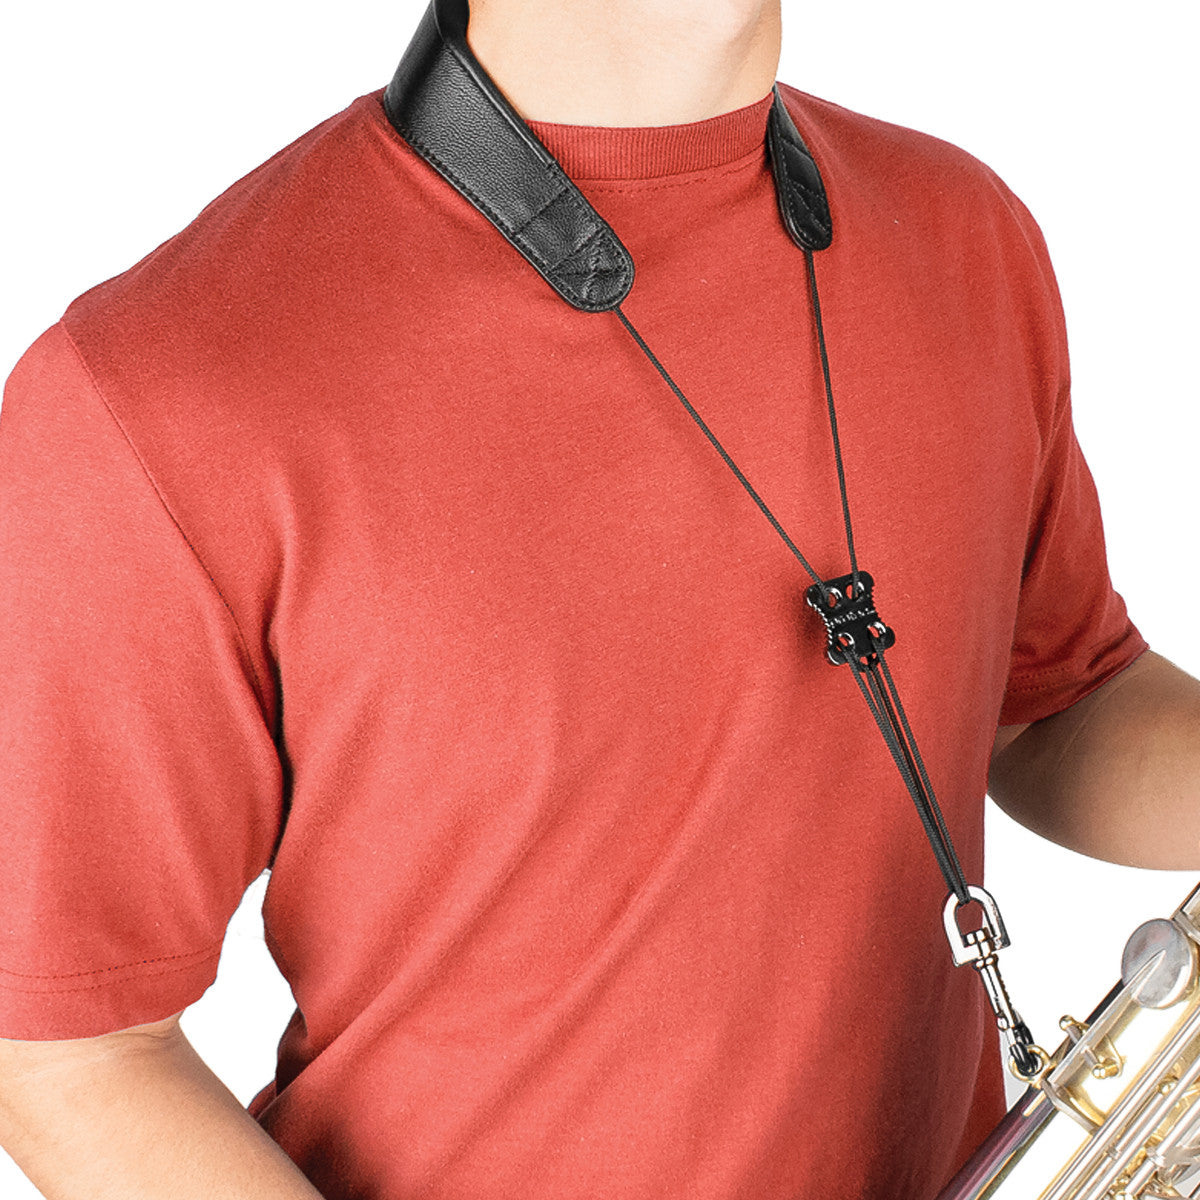 24" Saxophone Leather Neck Strap with Metal Snap